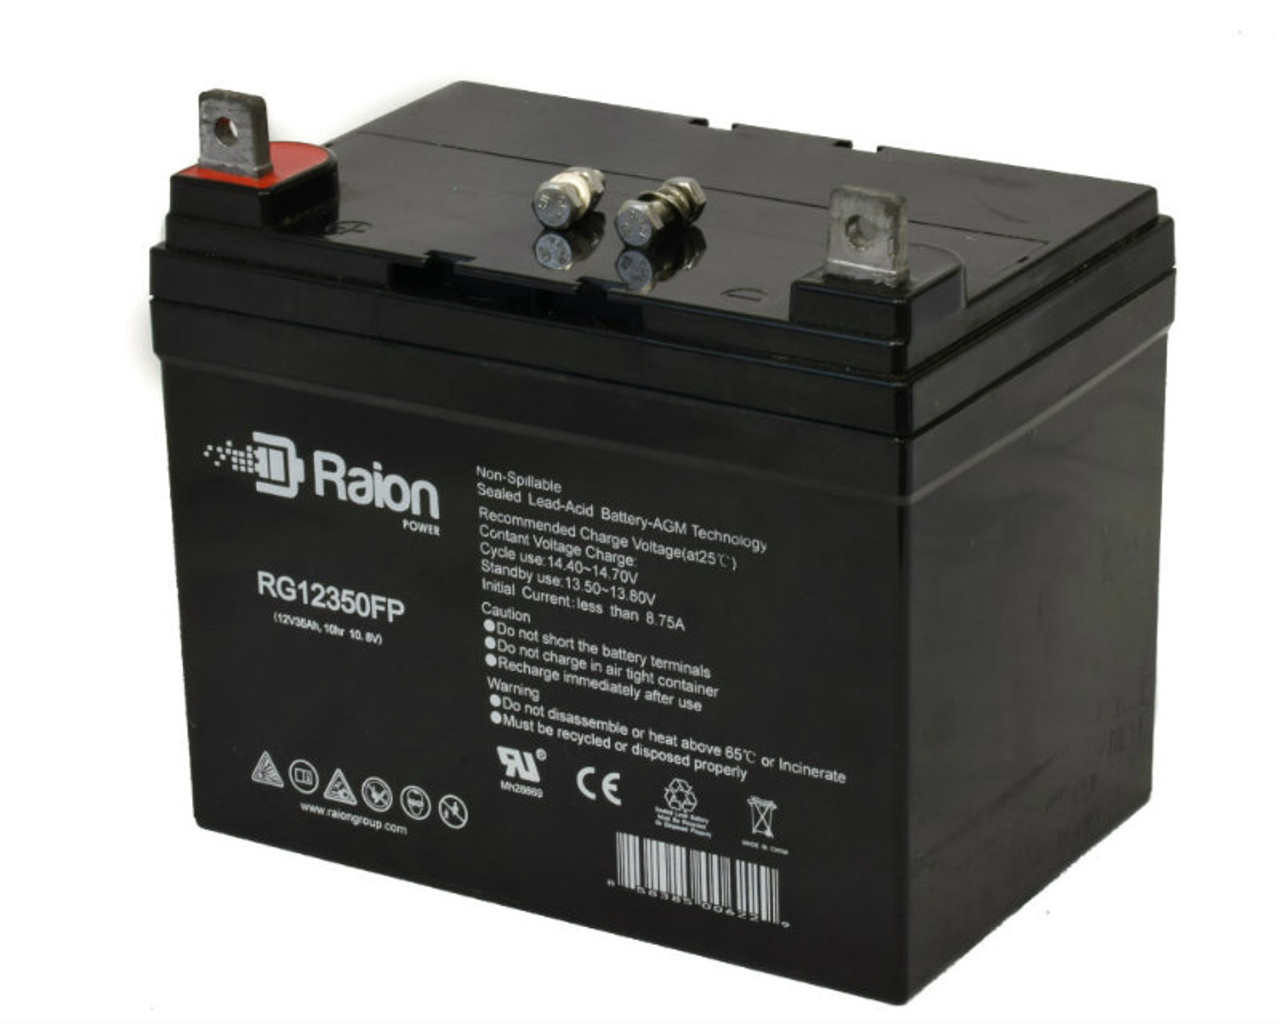 Raion Power Replacement 12V 35Ah RG12350FP Battery for Ariens Gravely 935000